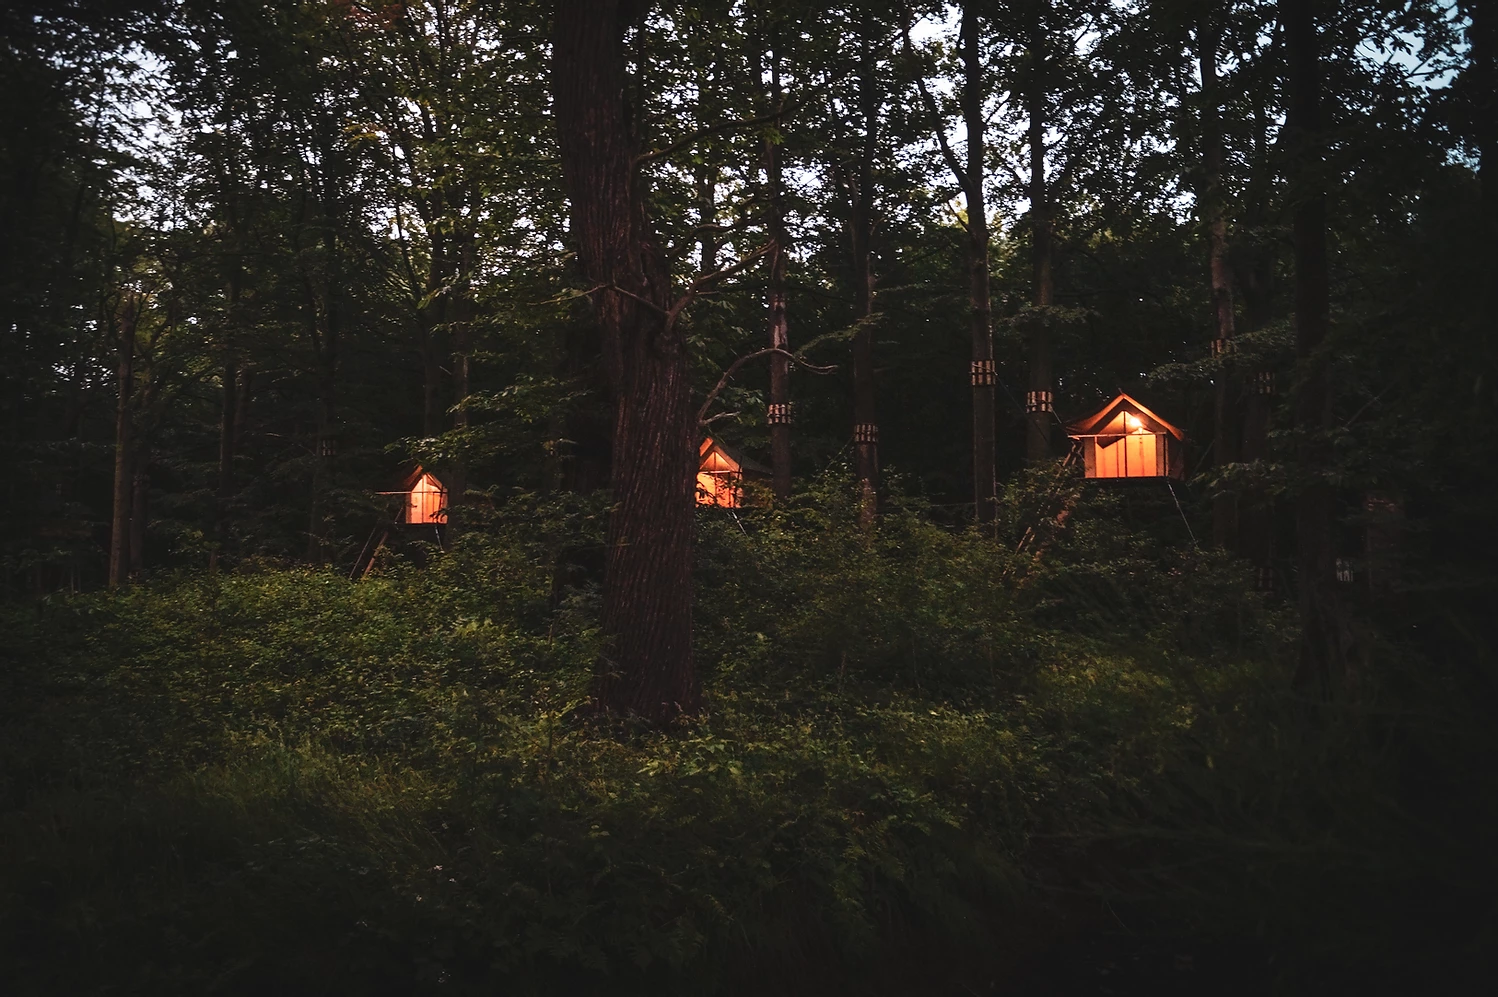 Boomkamp Treehouse Hotel Is All About The Simple Pleasures